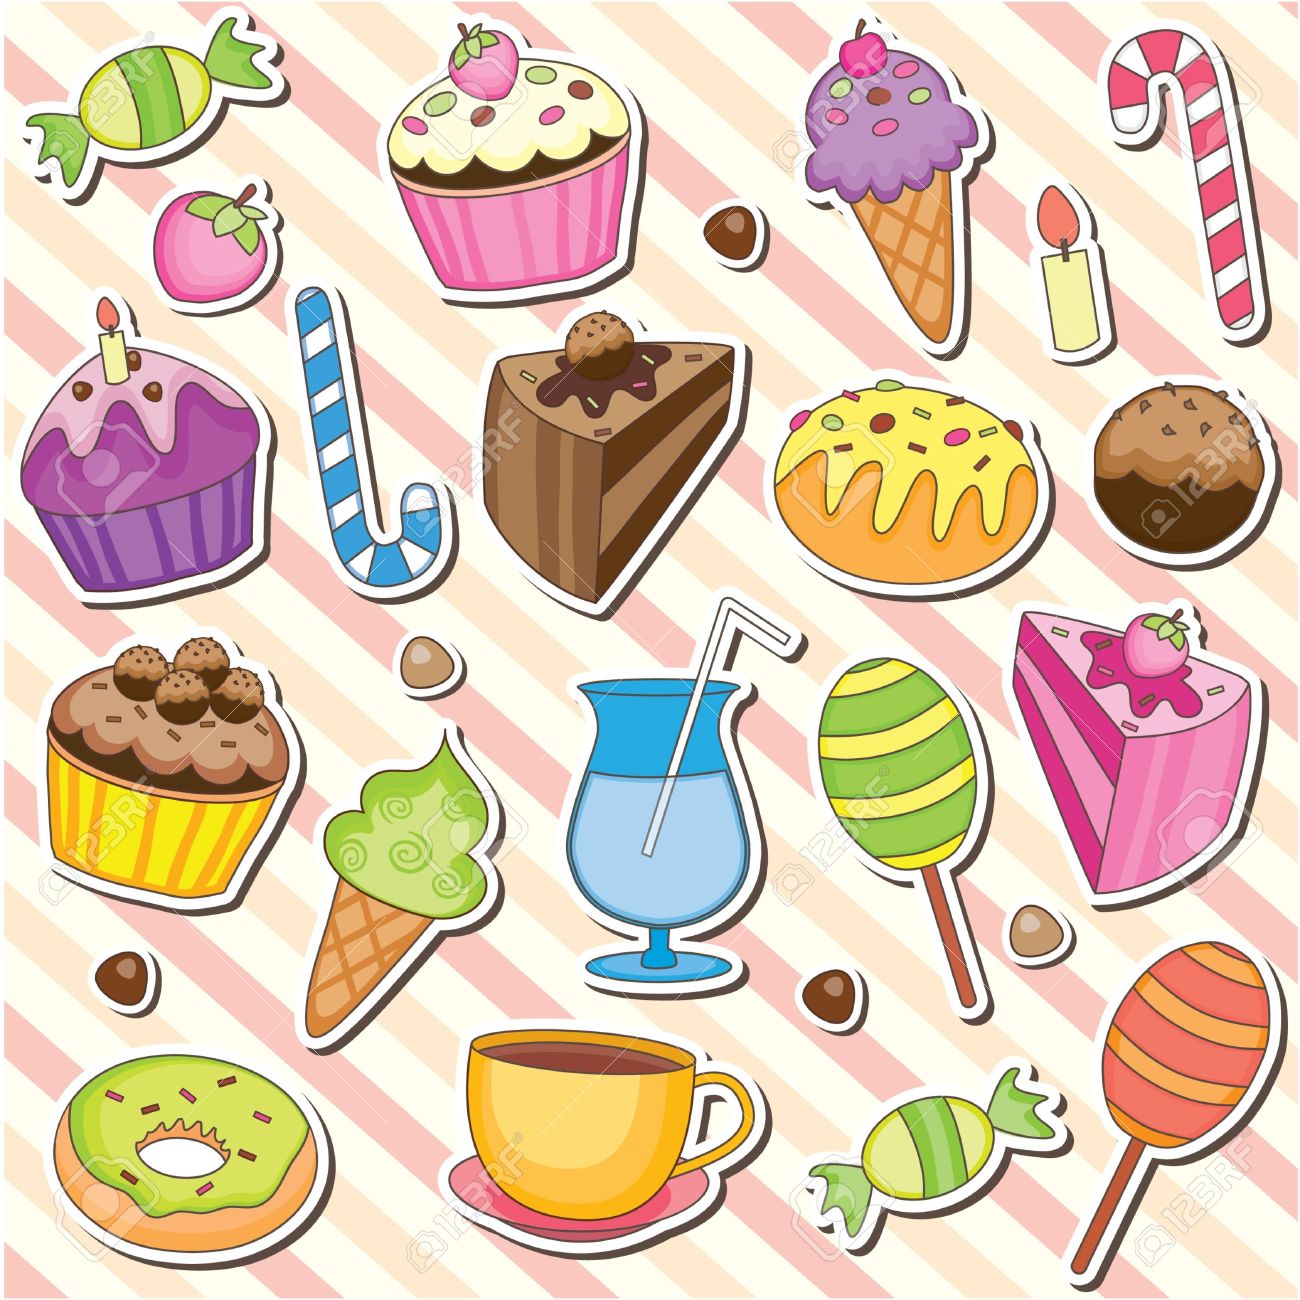 Fat clipart sugary food. Free dessert cliparts download